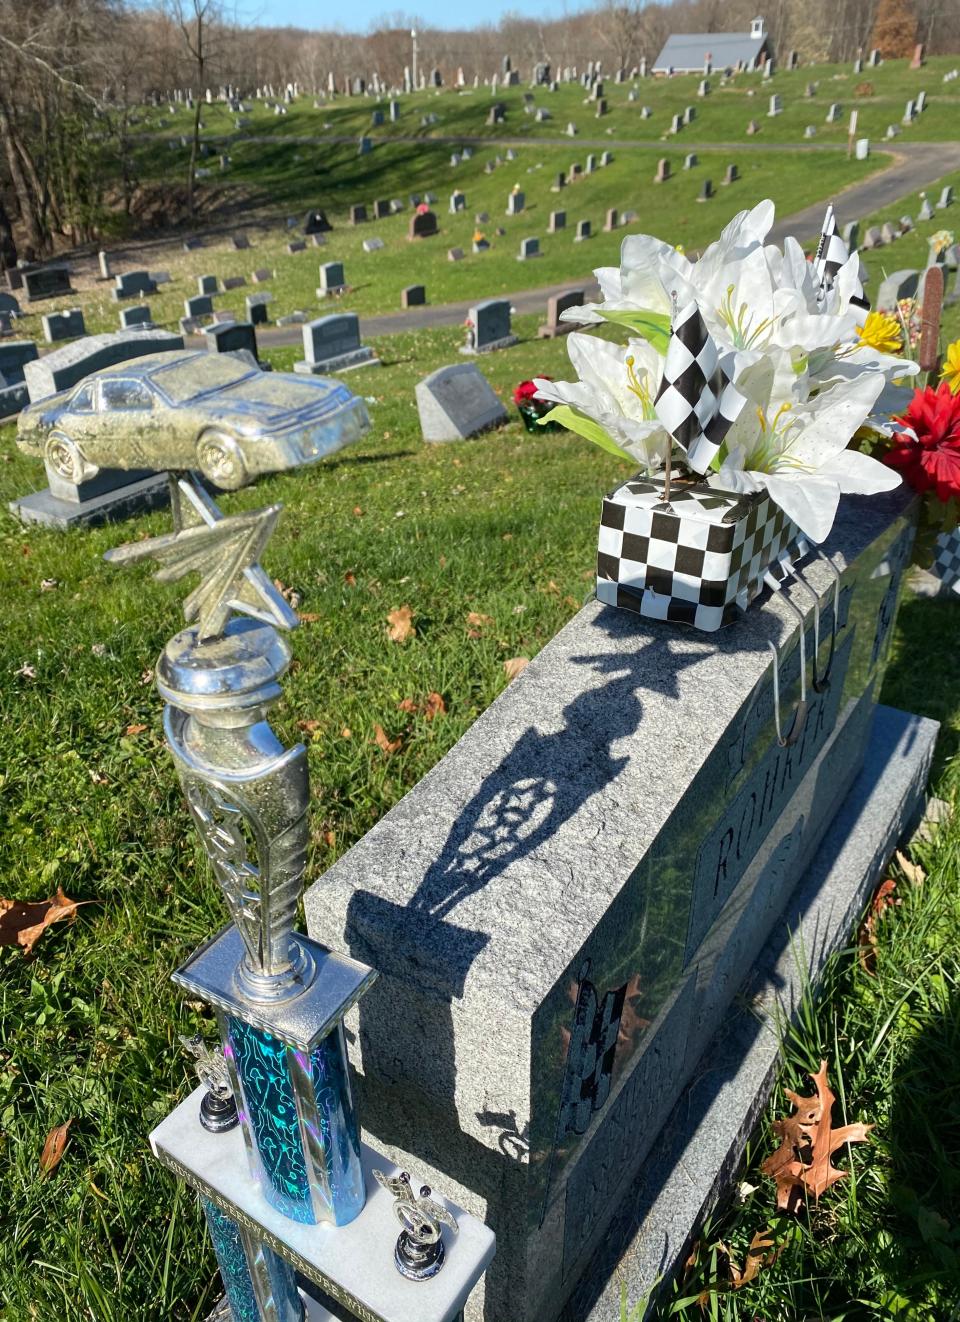 A gravesite at Melscheimer Cemetery in Pike Township displays personal touches and keepsakes in this Canton Repository file photo from 2020.